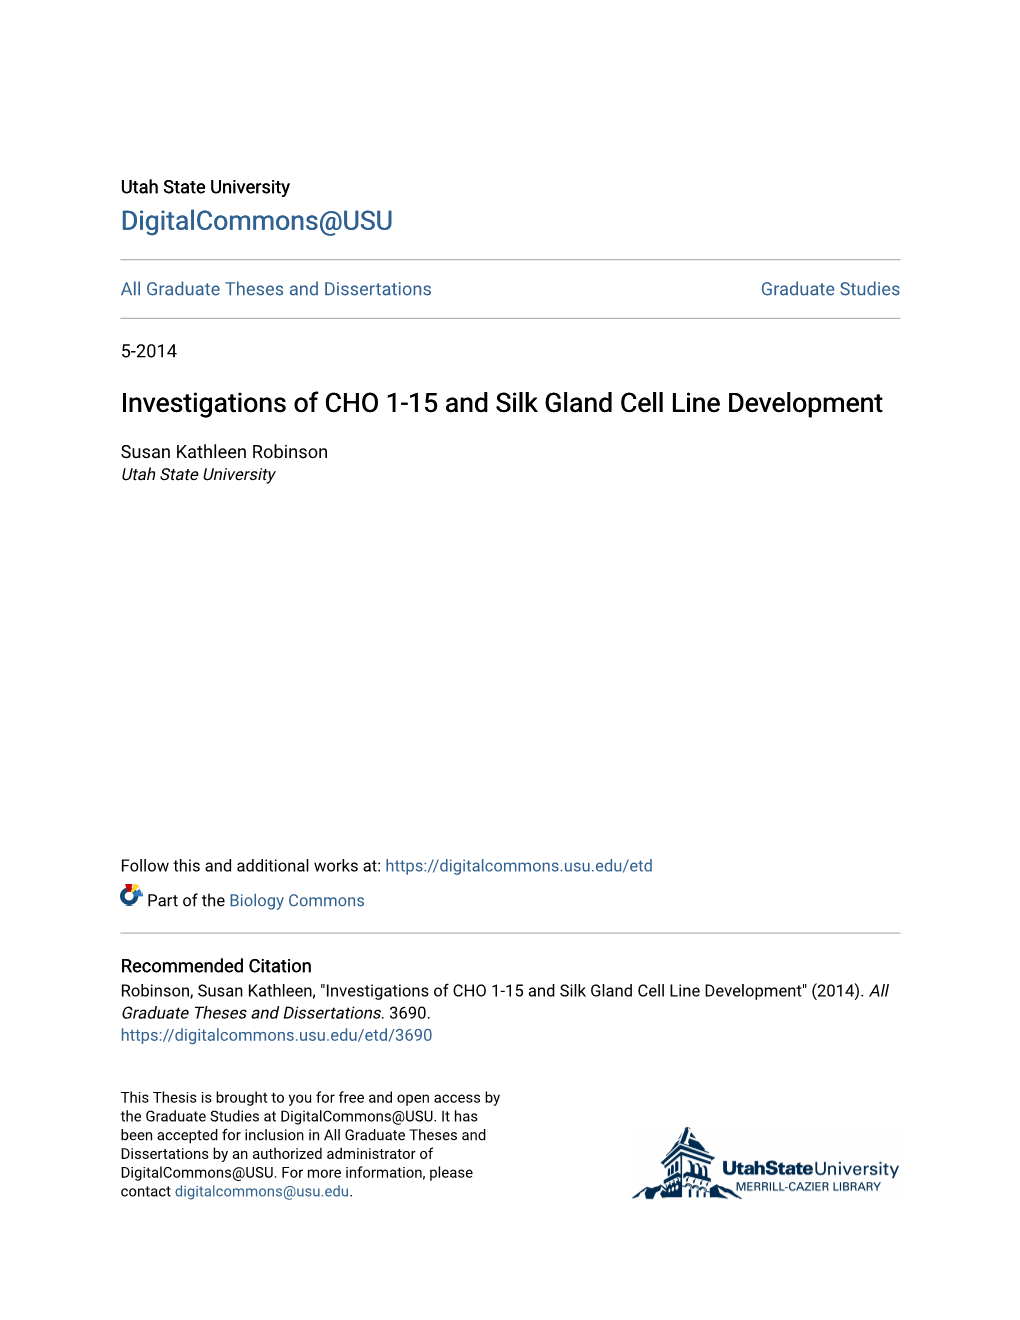 Investigations of CHO 1-15 and Silk Gland Cell Line Development